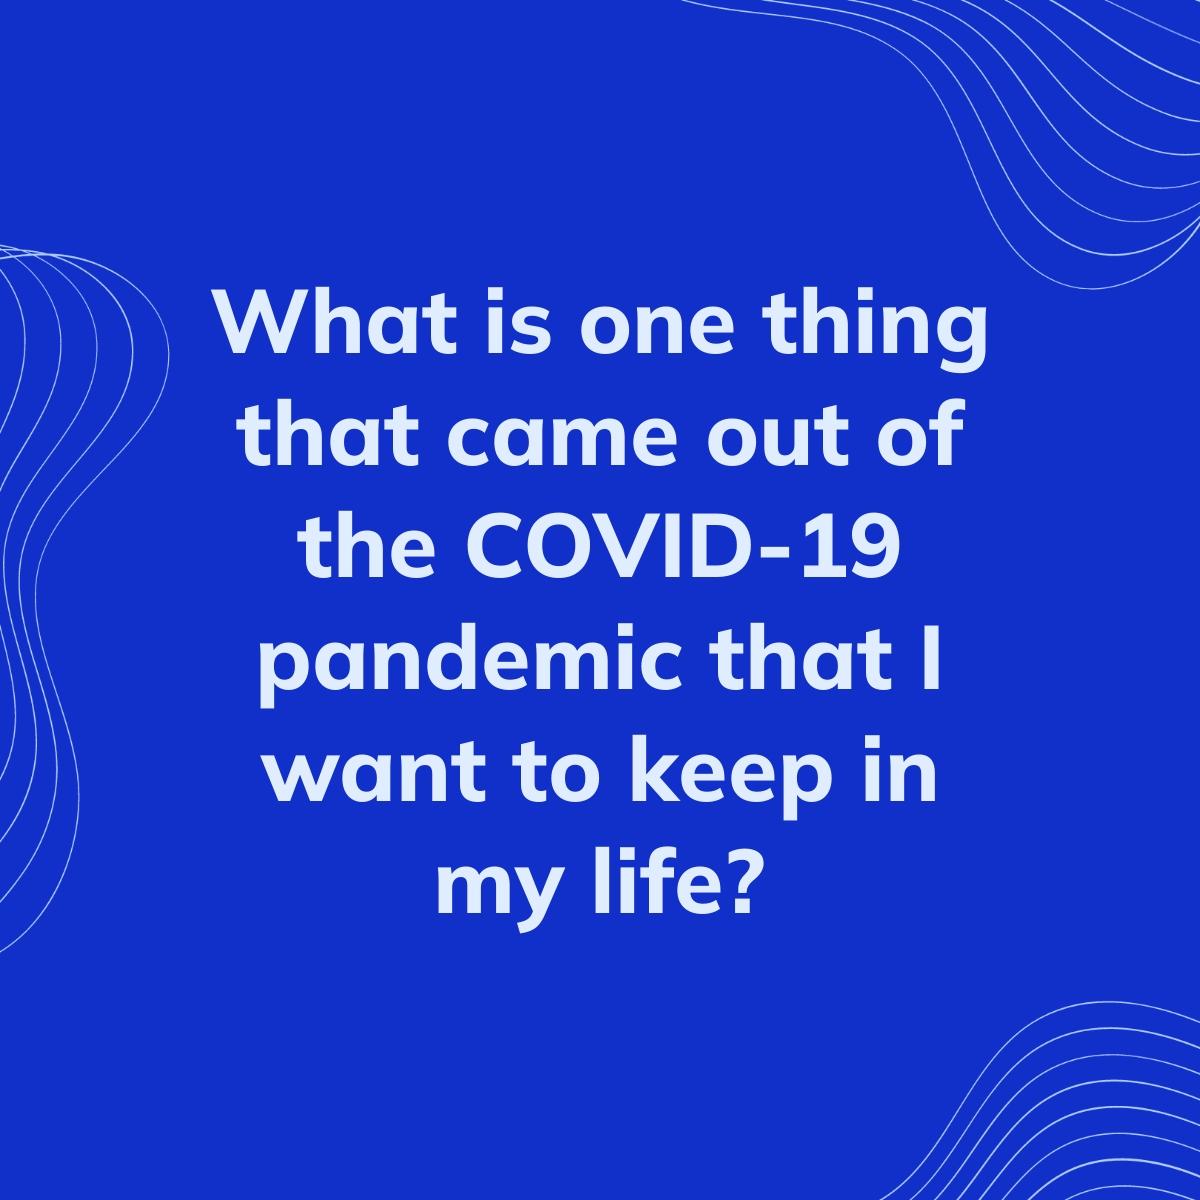 Journal Prompt: What is one thing that came out of the COVID-19 pandemic that I want to keep in my life?